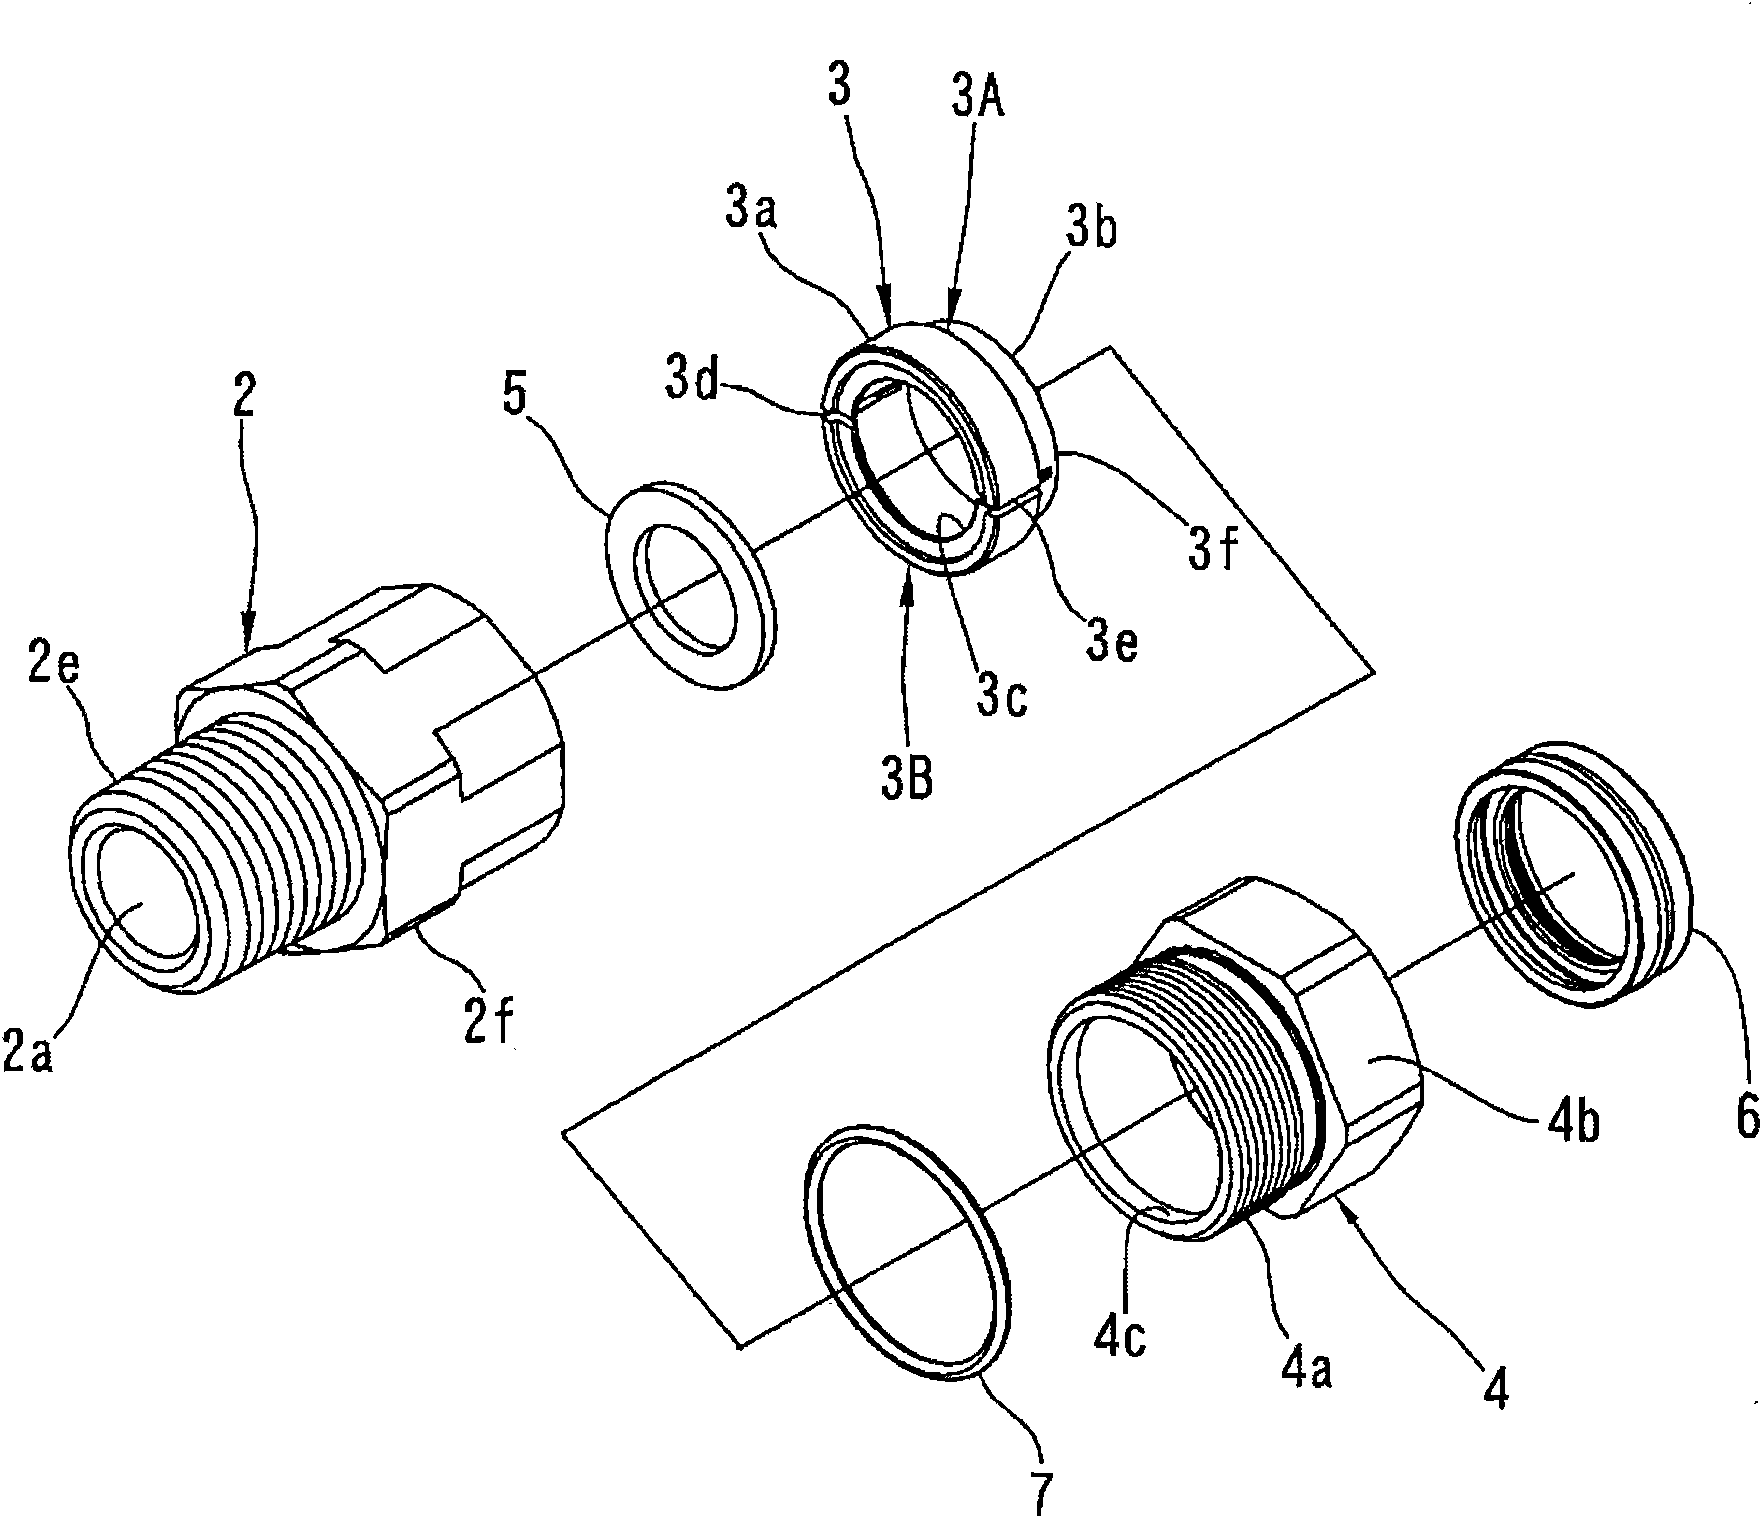 Connecting device for flexible gas tube